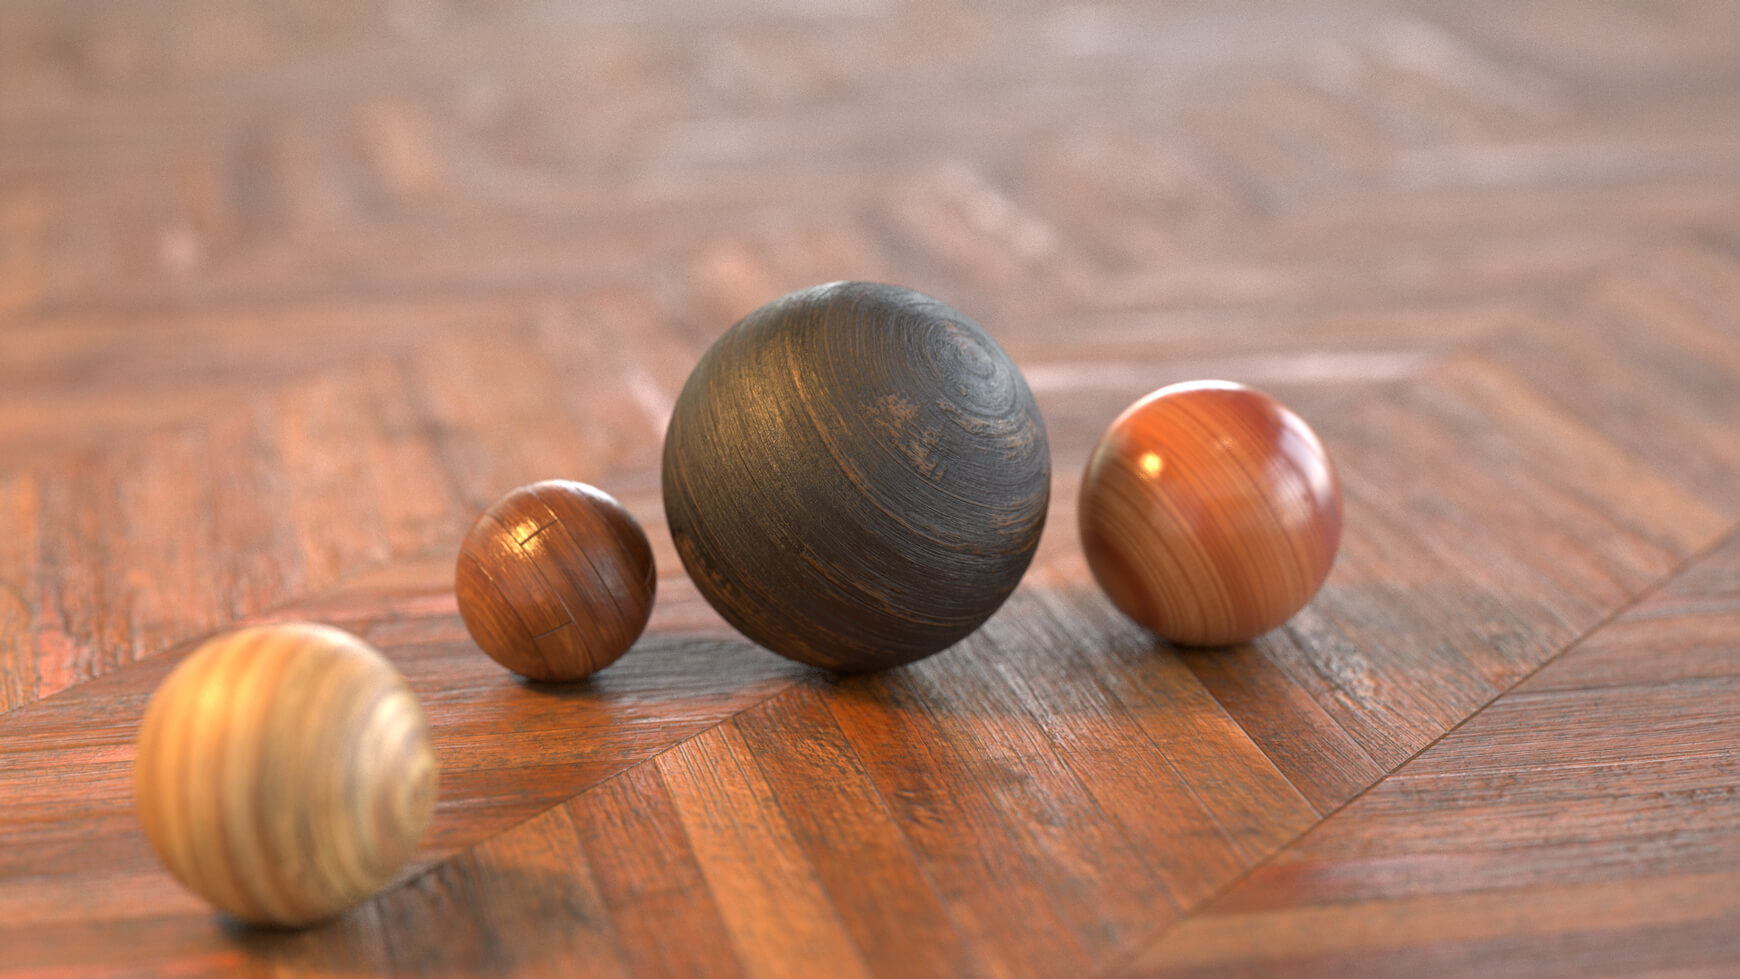 Redshift Cinema 4D Mutating Material Texture Pack Wood